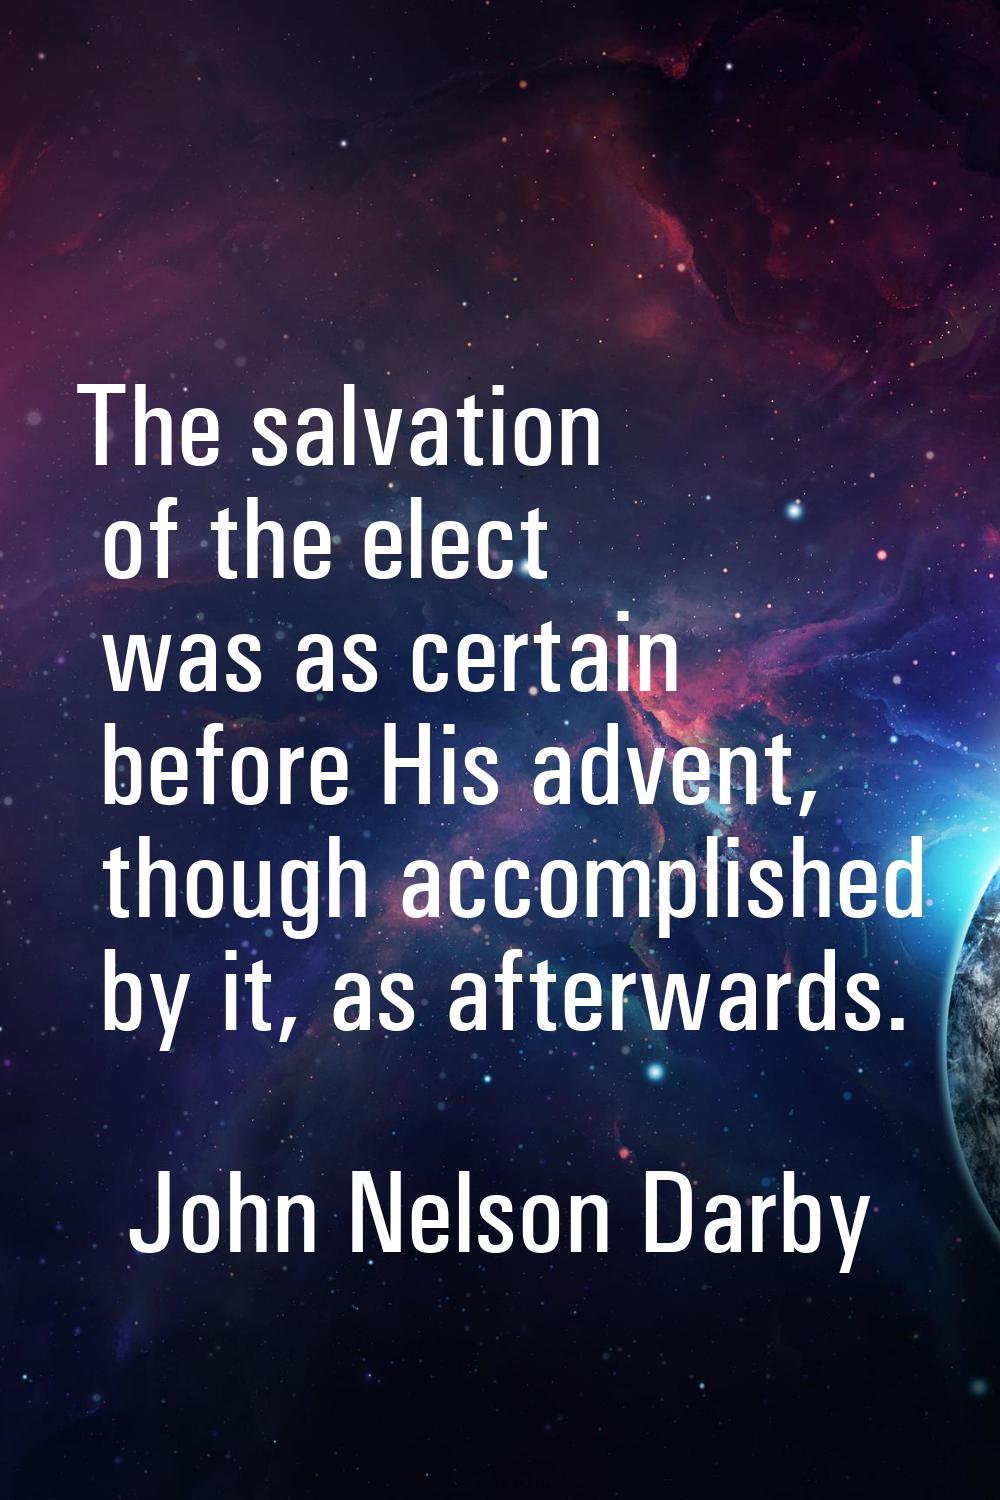 The salvation of the elect was as certain before His advent, though accomplished by it, as afterwar